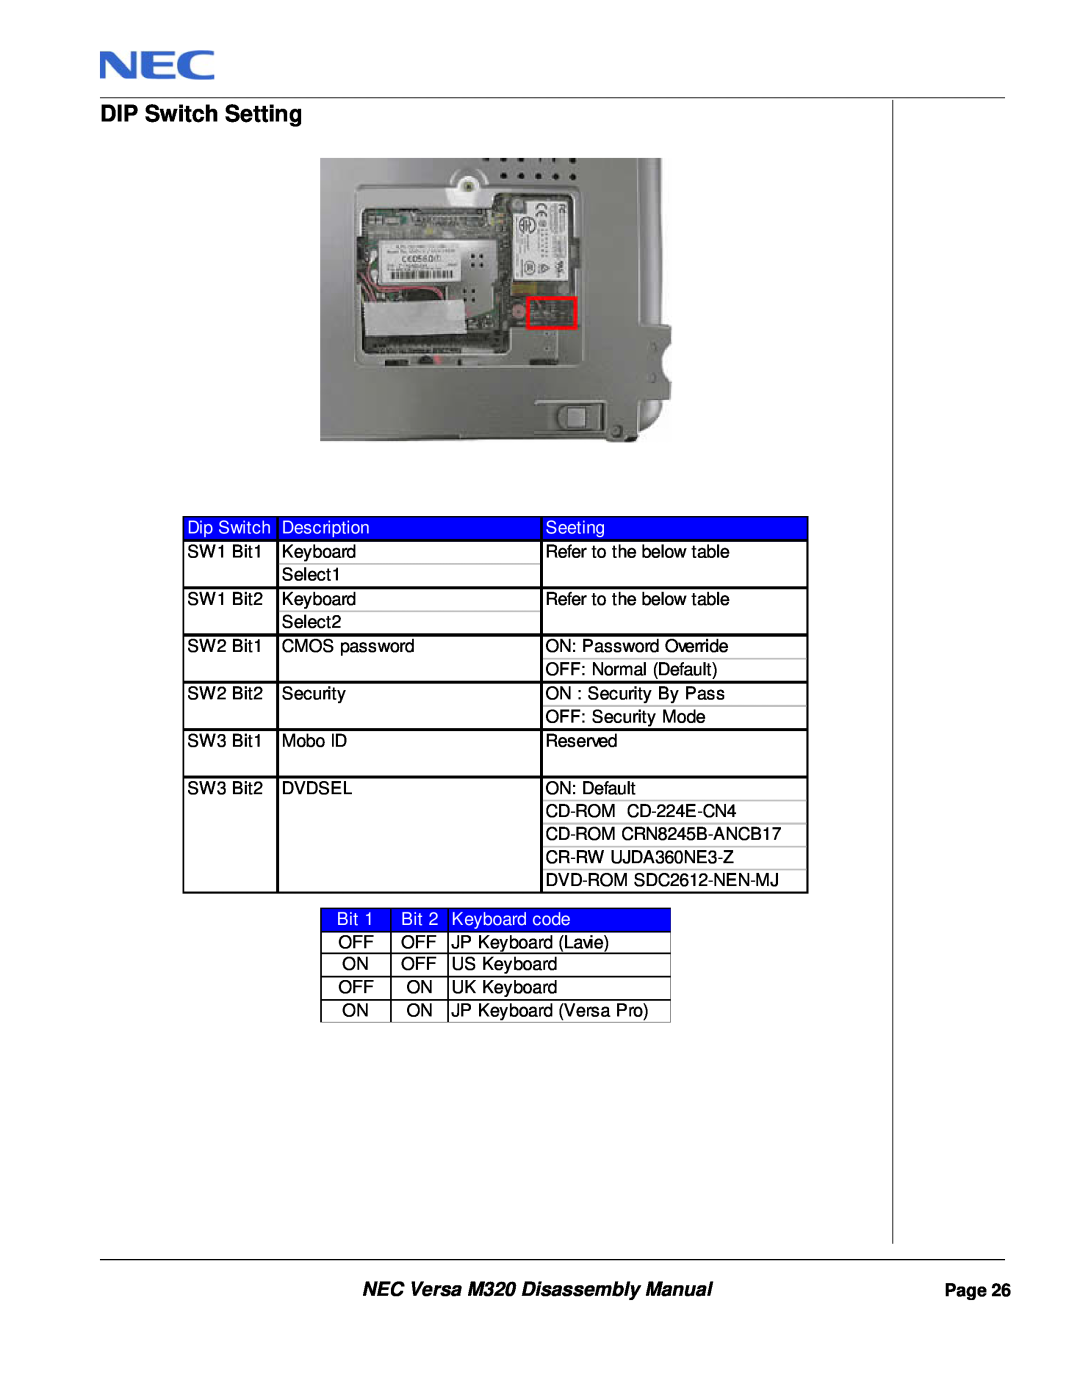 NEC manual DIP Switch Setting, NEC Versa M320 Disassembly Manual, Dip Switch, Description, Seeting, Keyboard code 